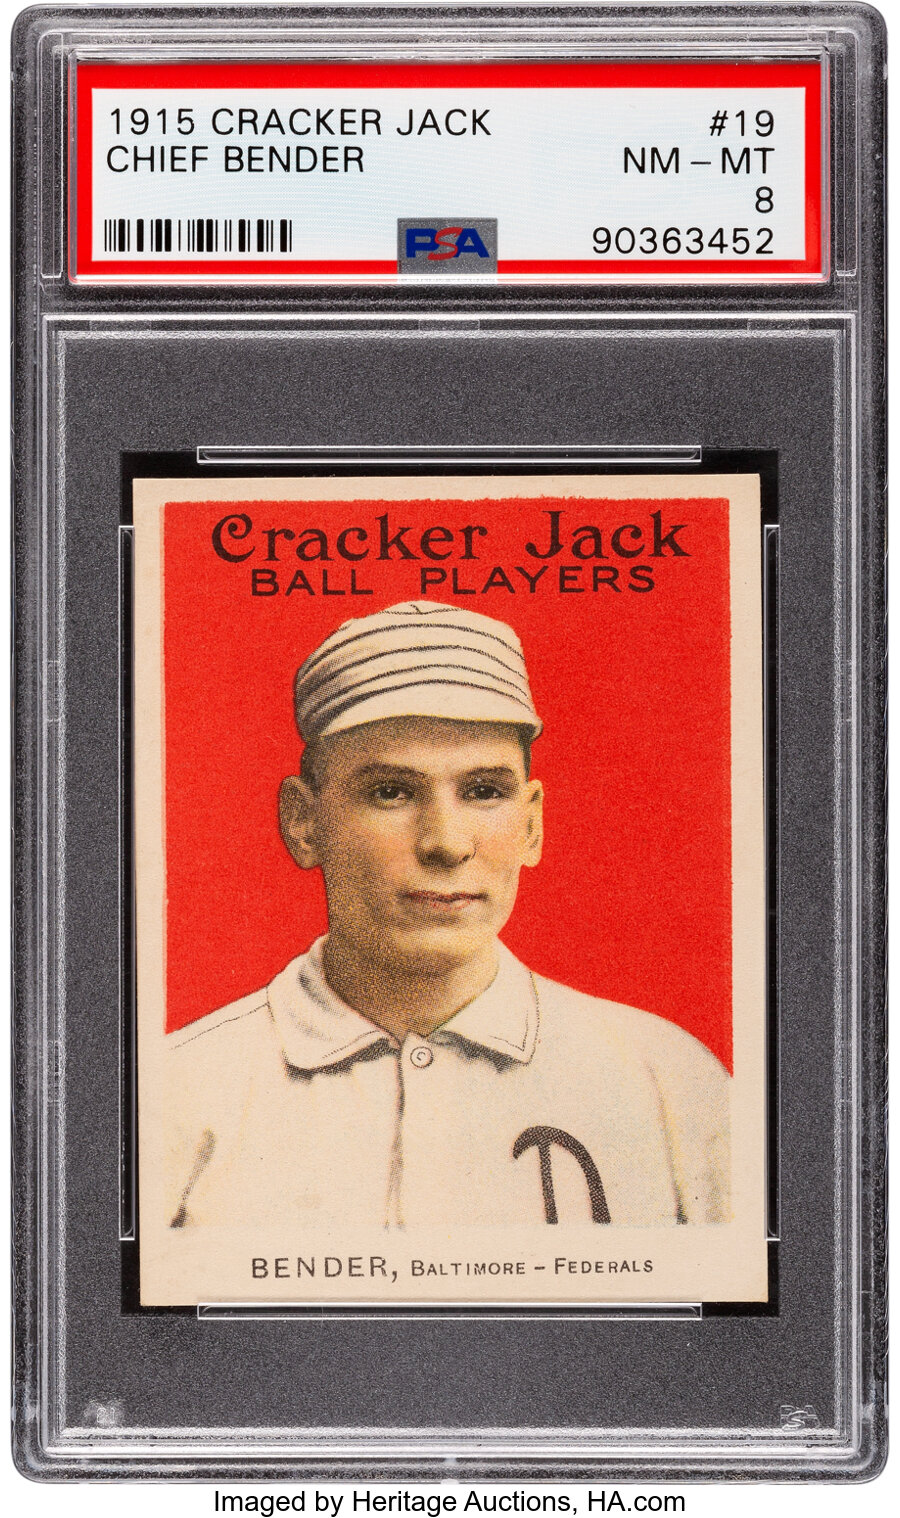 1915 Cracker Jack Chief Bender #19 PSA NM-MT 8 - Only Two Higher